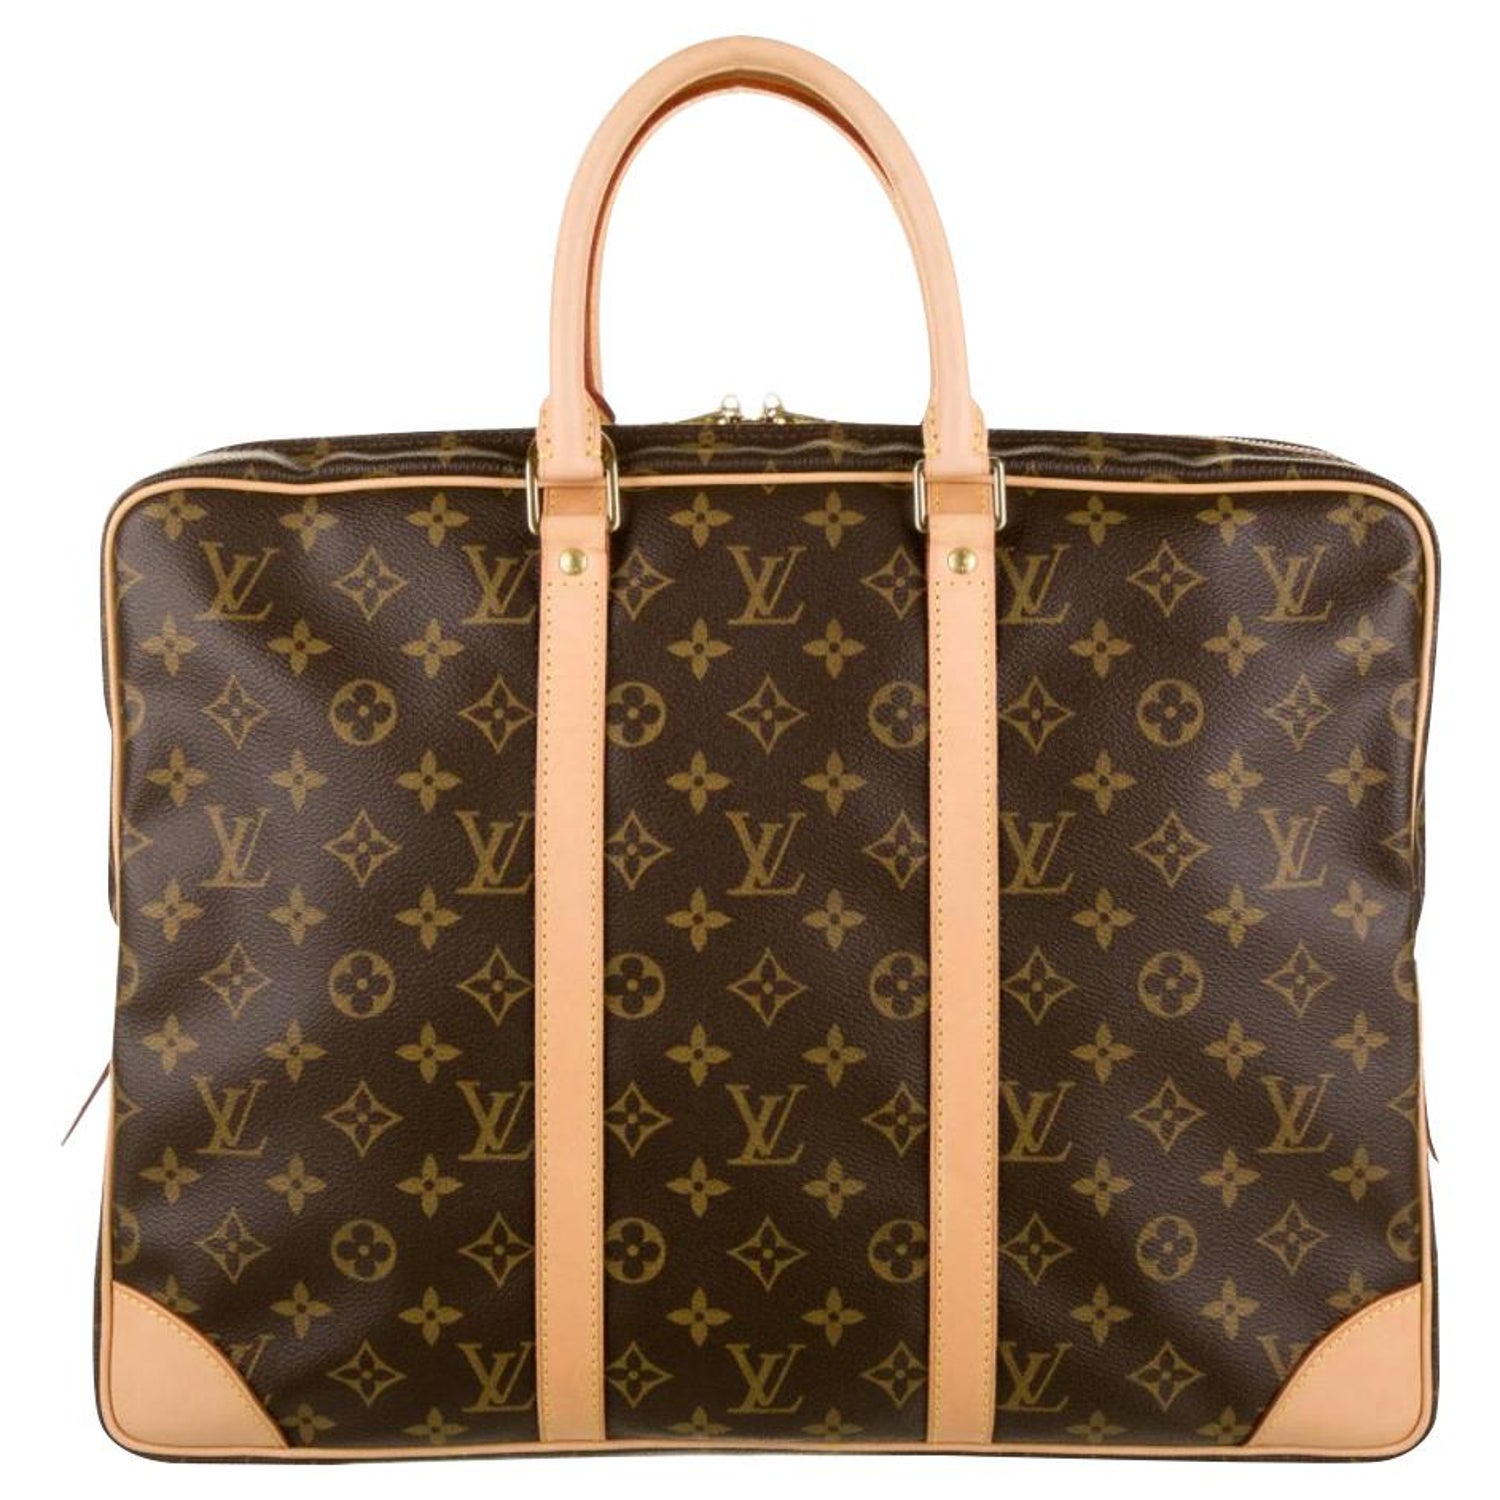 Louis Vuitton Men Tote Bag - 3 For Sale on 1stDibs